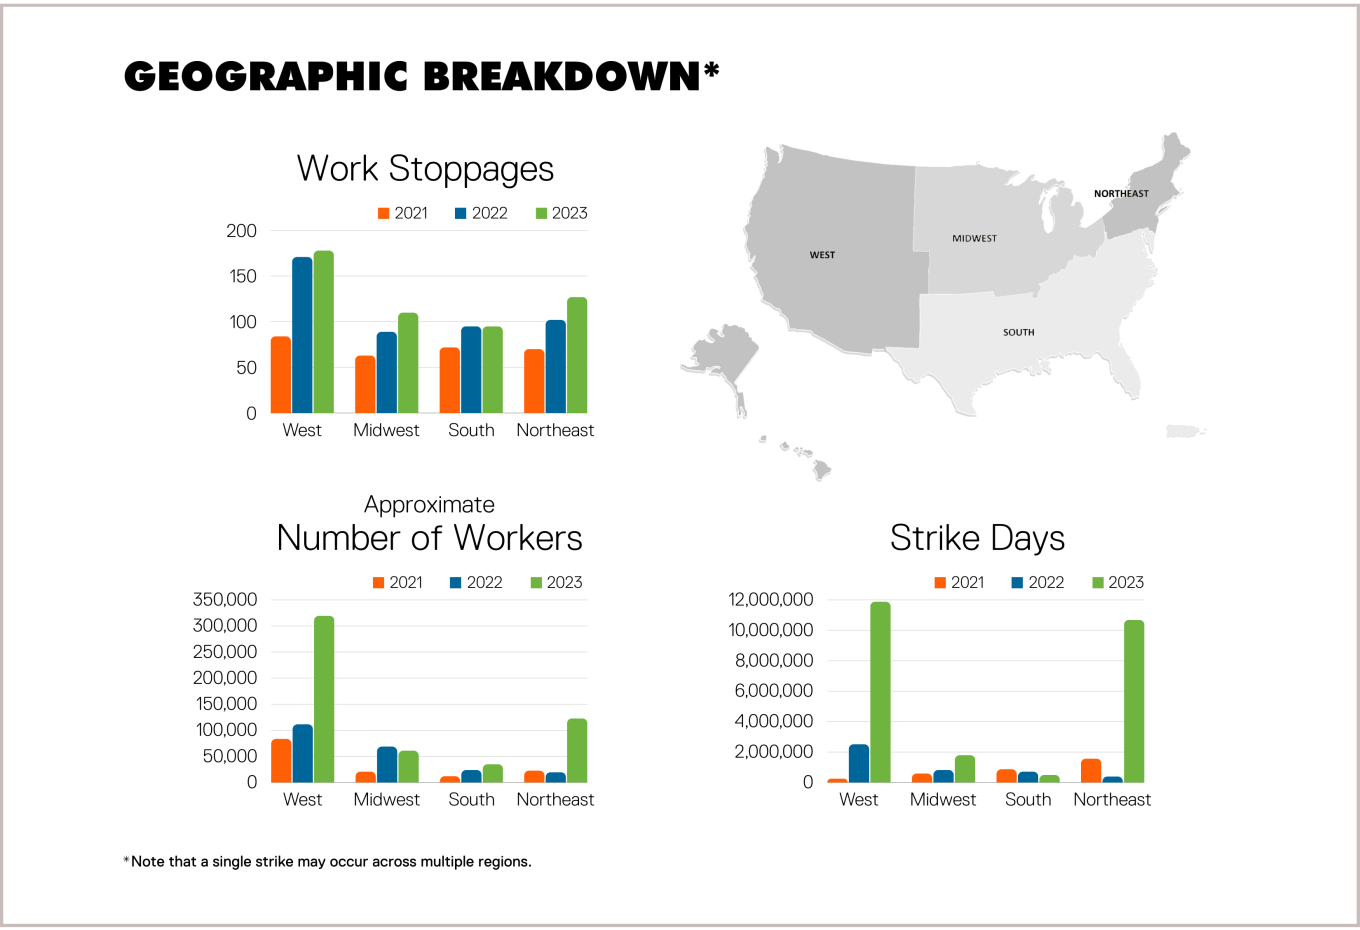 Graphs showing the geographical breakdown of strikes and works stoppages across the U.S. between 2021 and 2023.